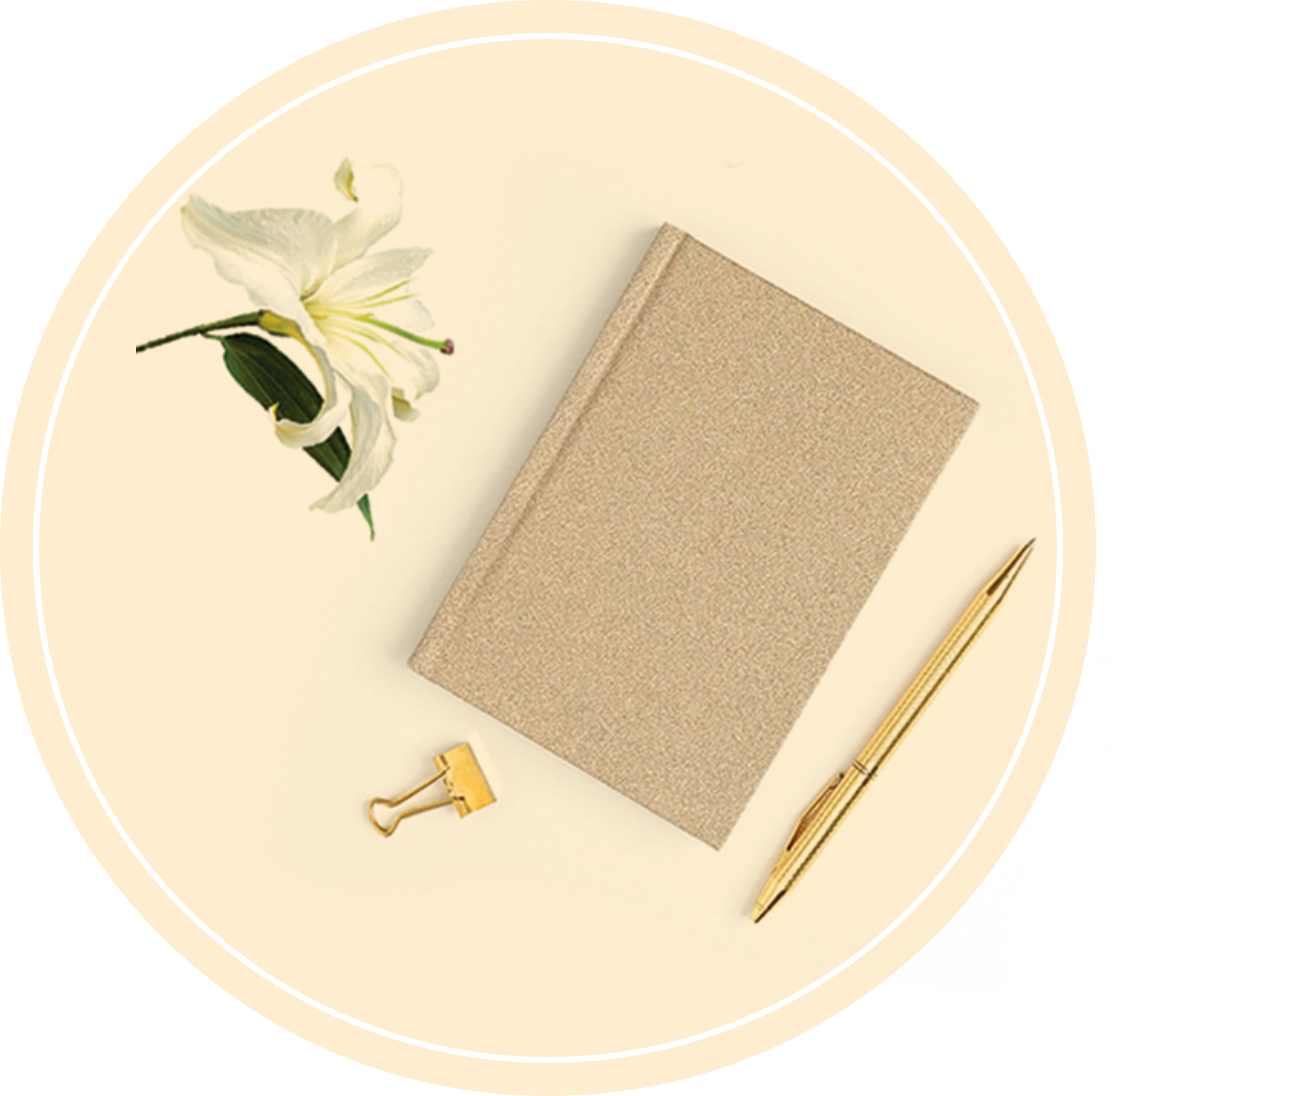 Image of a Notebook that can be used for funeral planning services